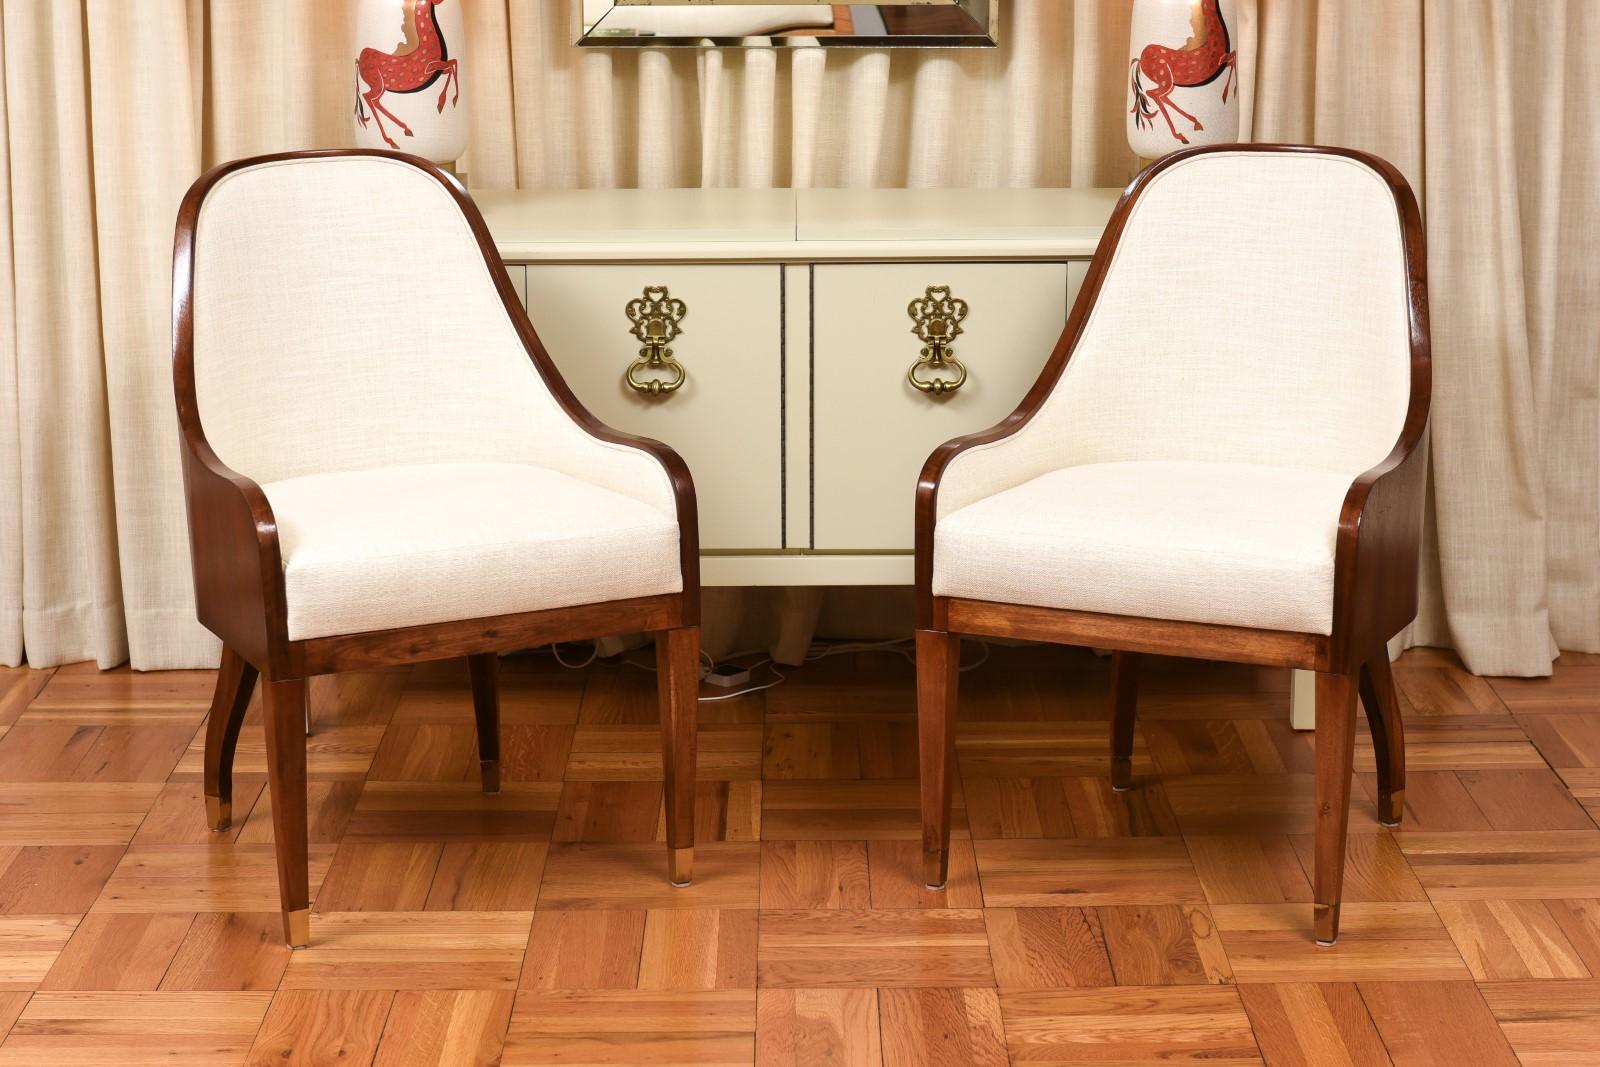 Spectacular Set of 10 Art Deco Revival Chairs in Bookmatch Figured Walnut For Sale 13